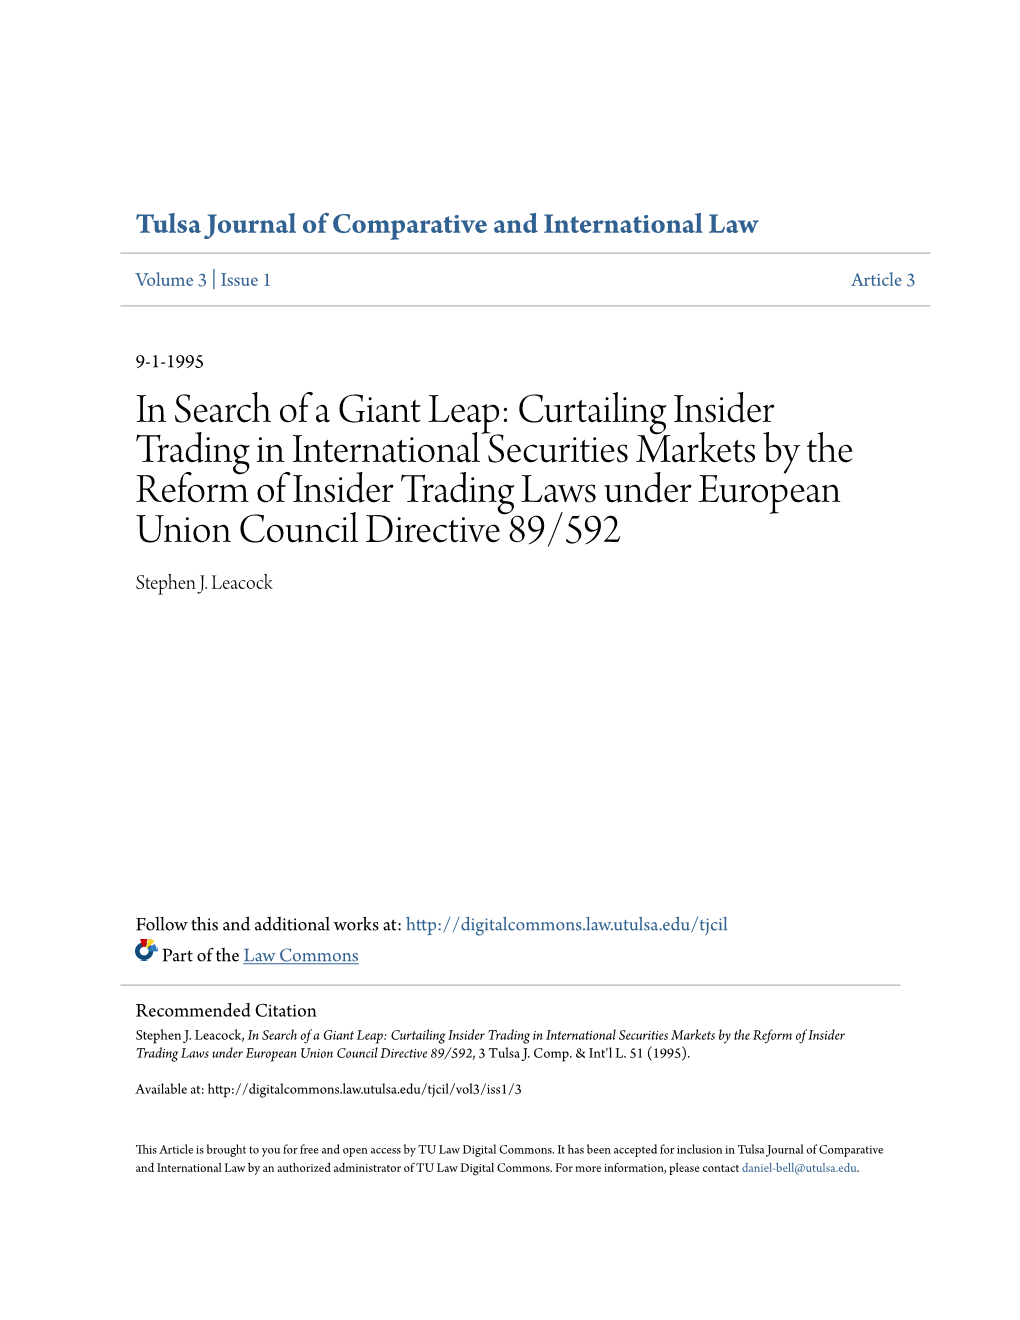 Curtailing Insider Trading in International Securities Markets by the Reform of Insider Trading Laws Under European Union Council Directive 89/592 Stephen J